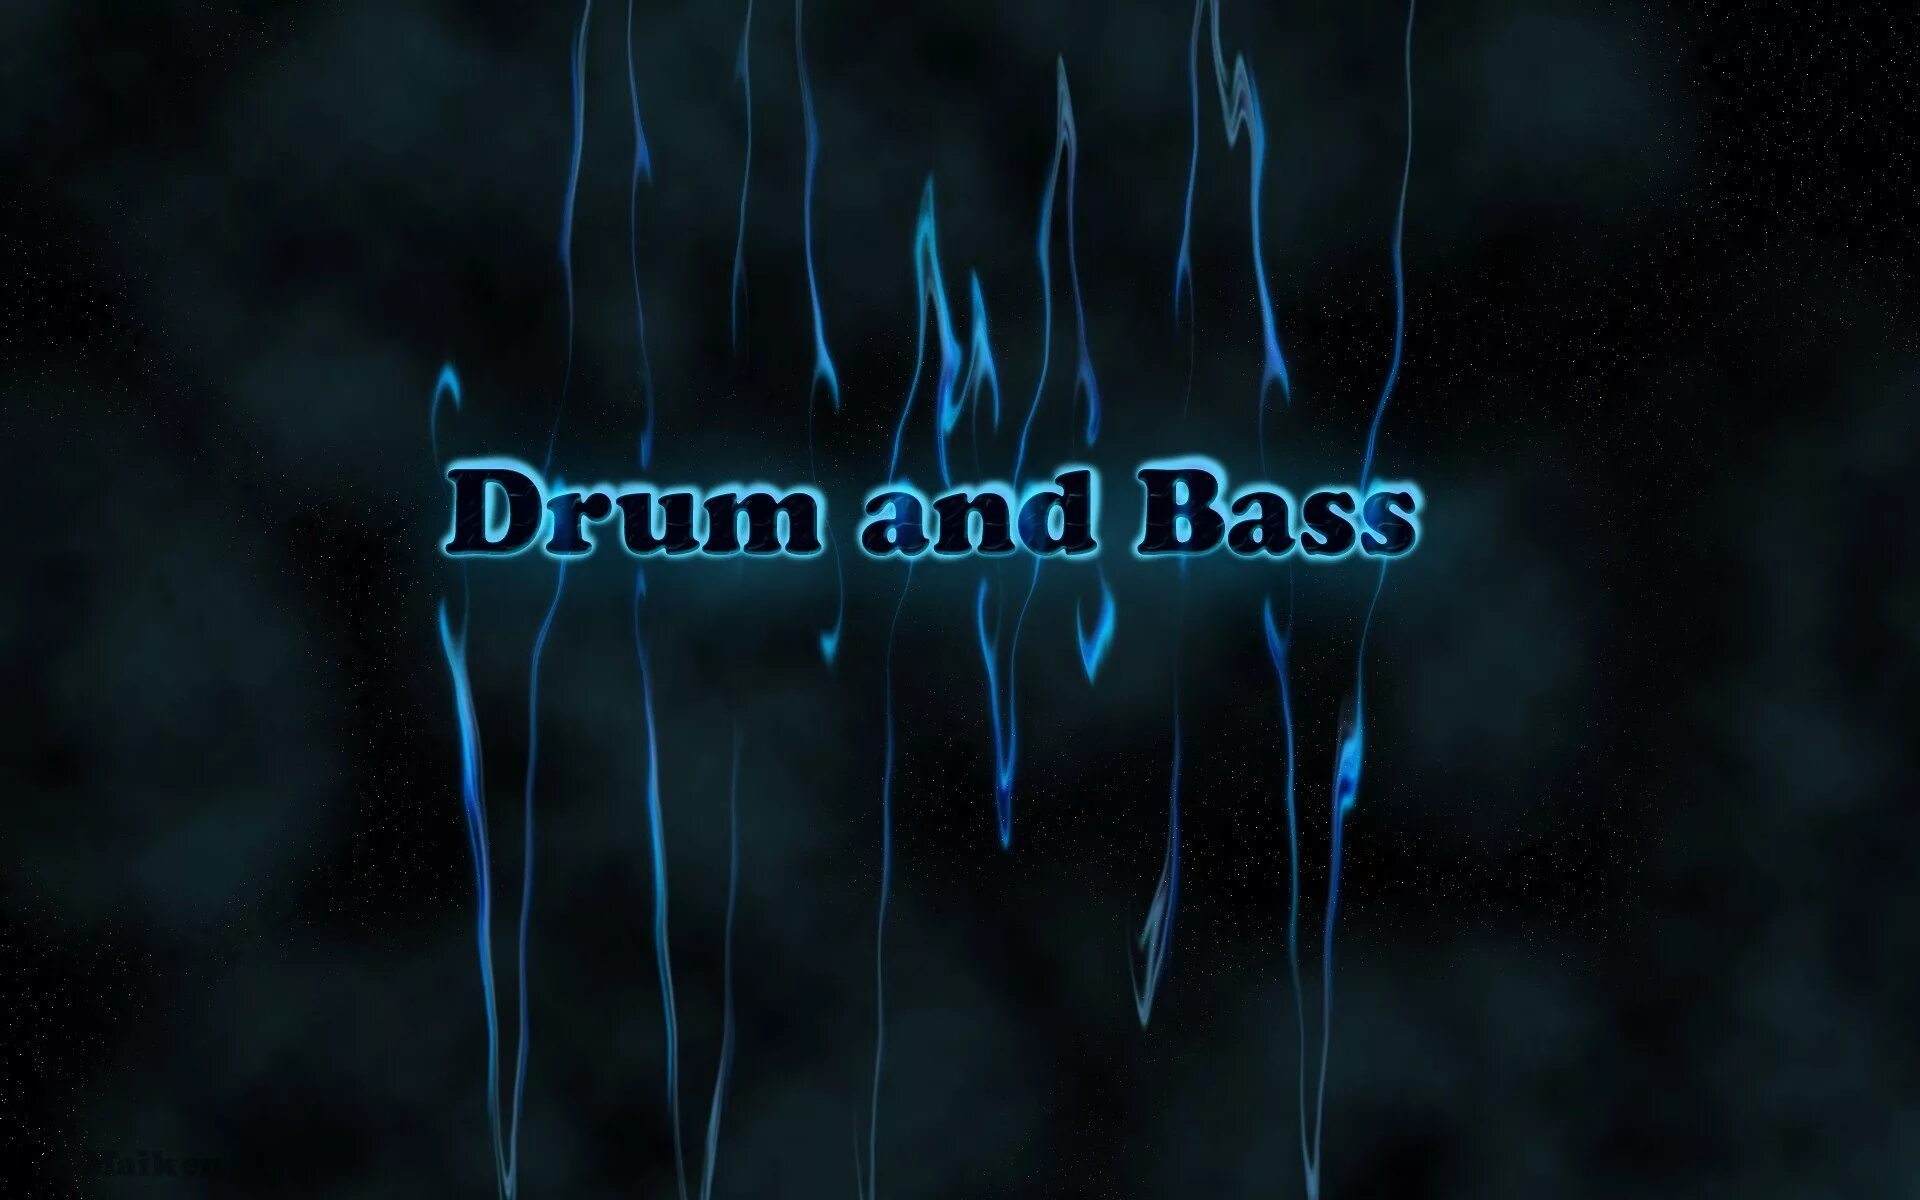 Drum and bass лучшее. Drum and Bass. Drum and Bass надпись. Drum and Bass обои. Драм и бас.